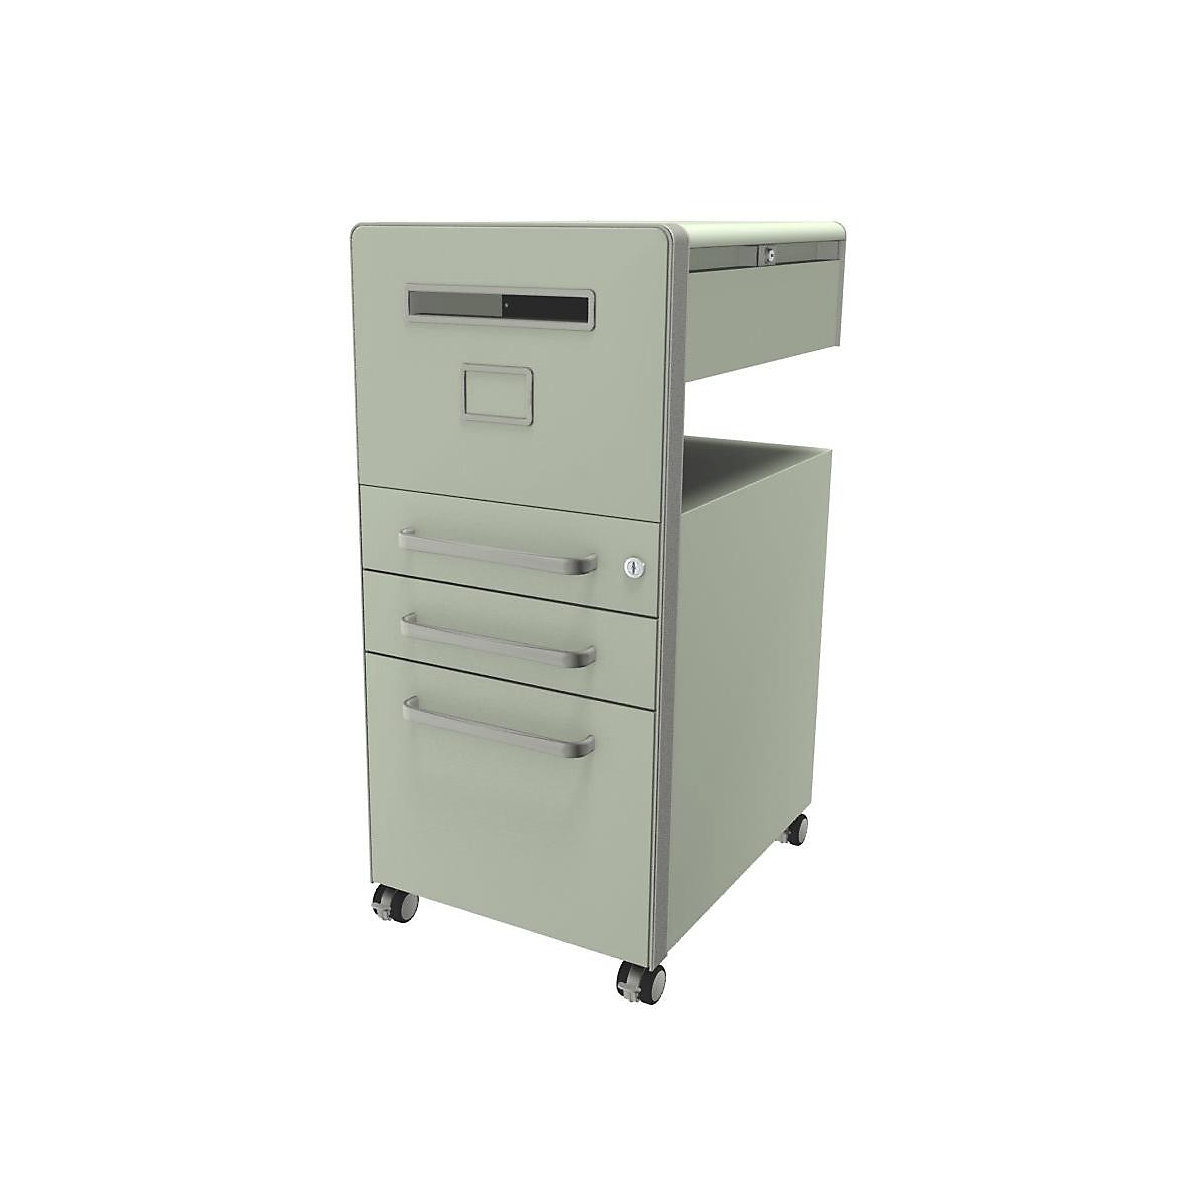 Bite™ pedestal furniture, with 1 whiteboard, opens on the left side – BISLEY, with 2 universal drawers, 1 suspension file drawer, portland-8